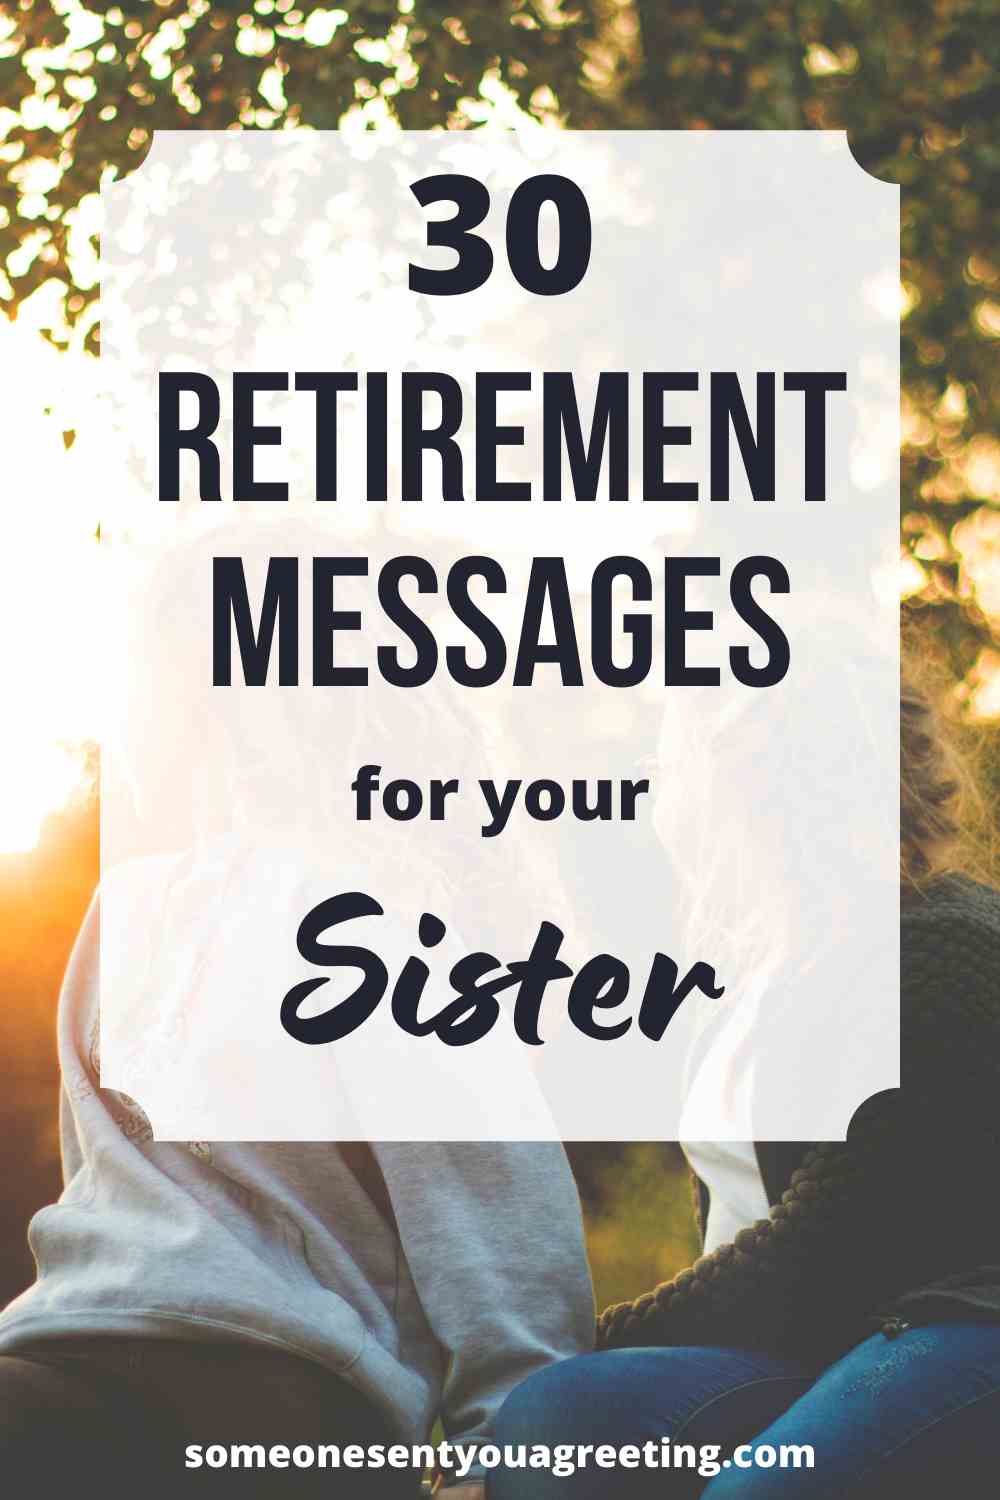 Retirement messages for sister